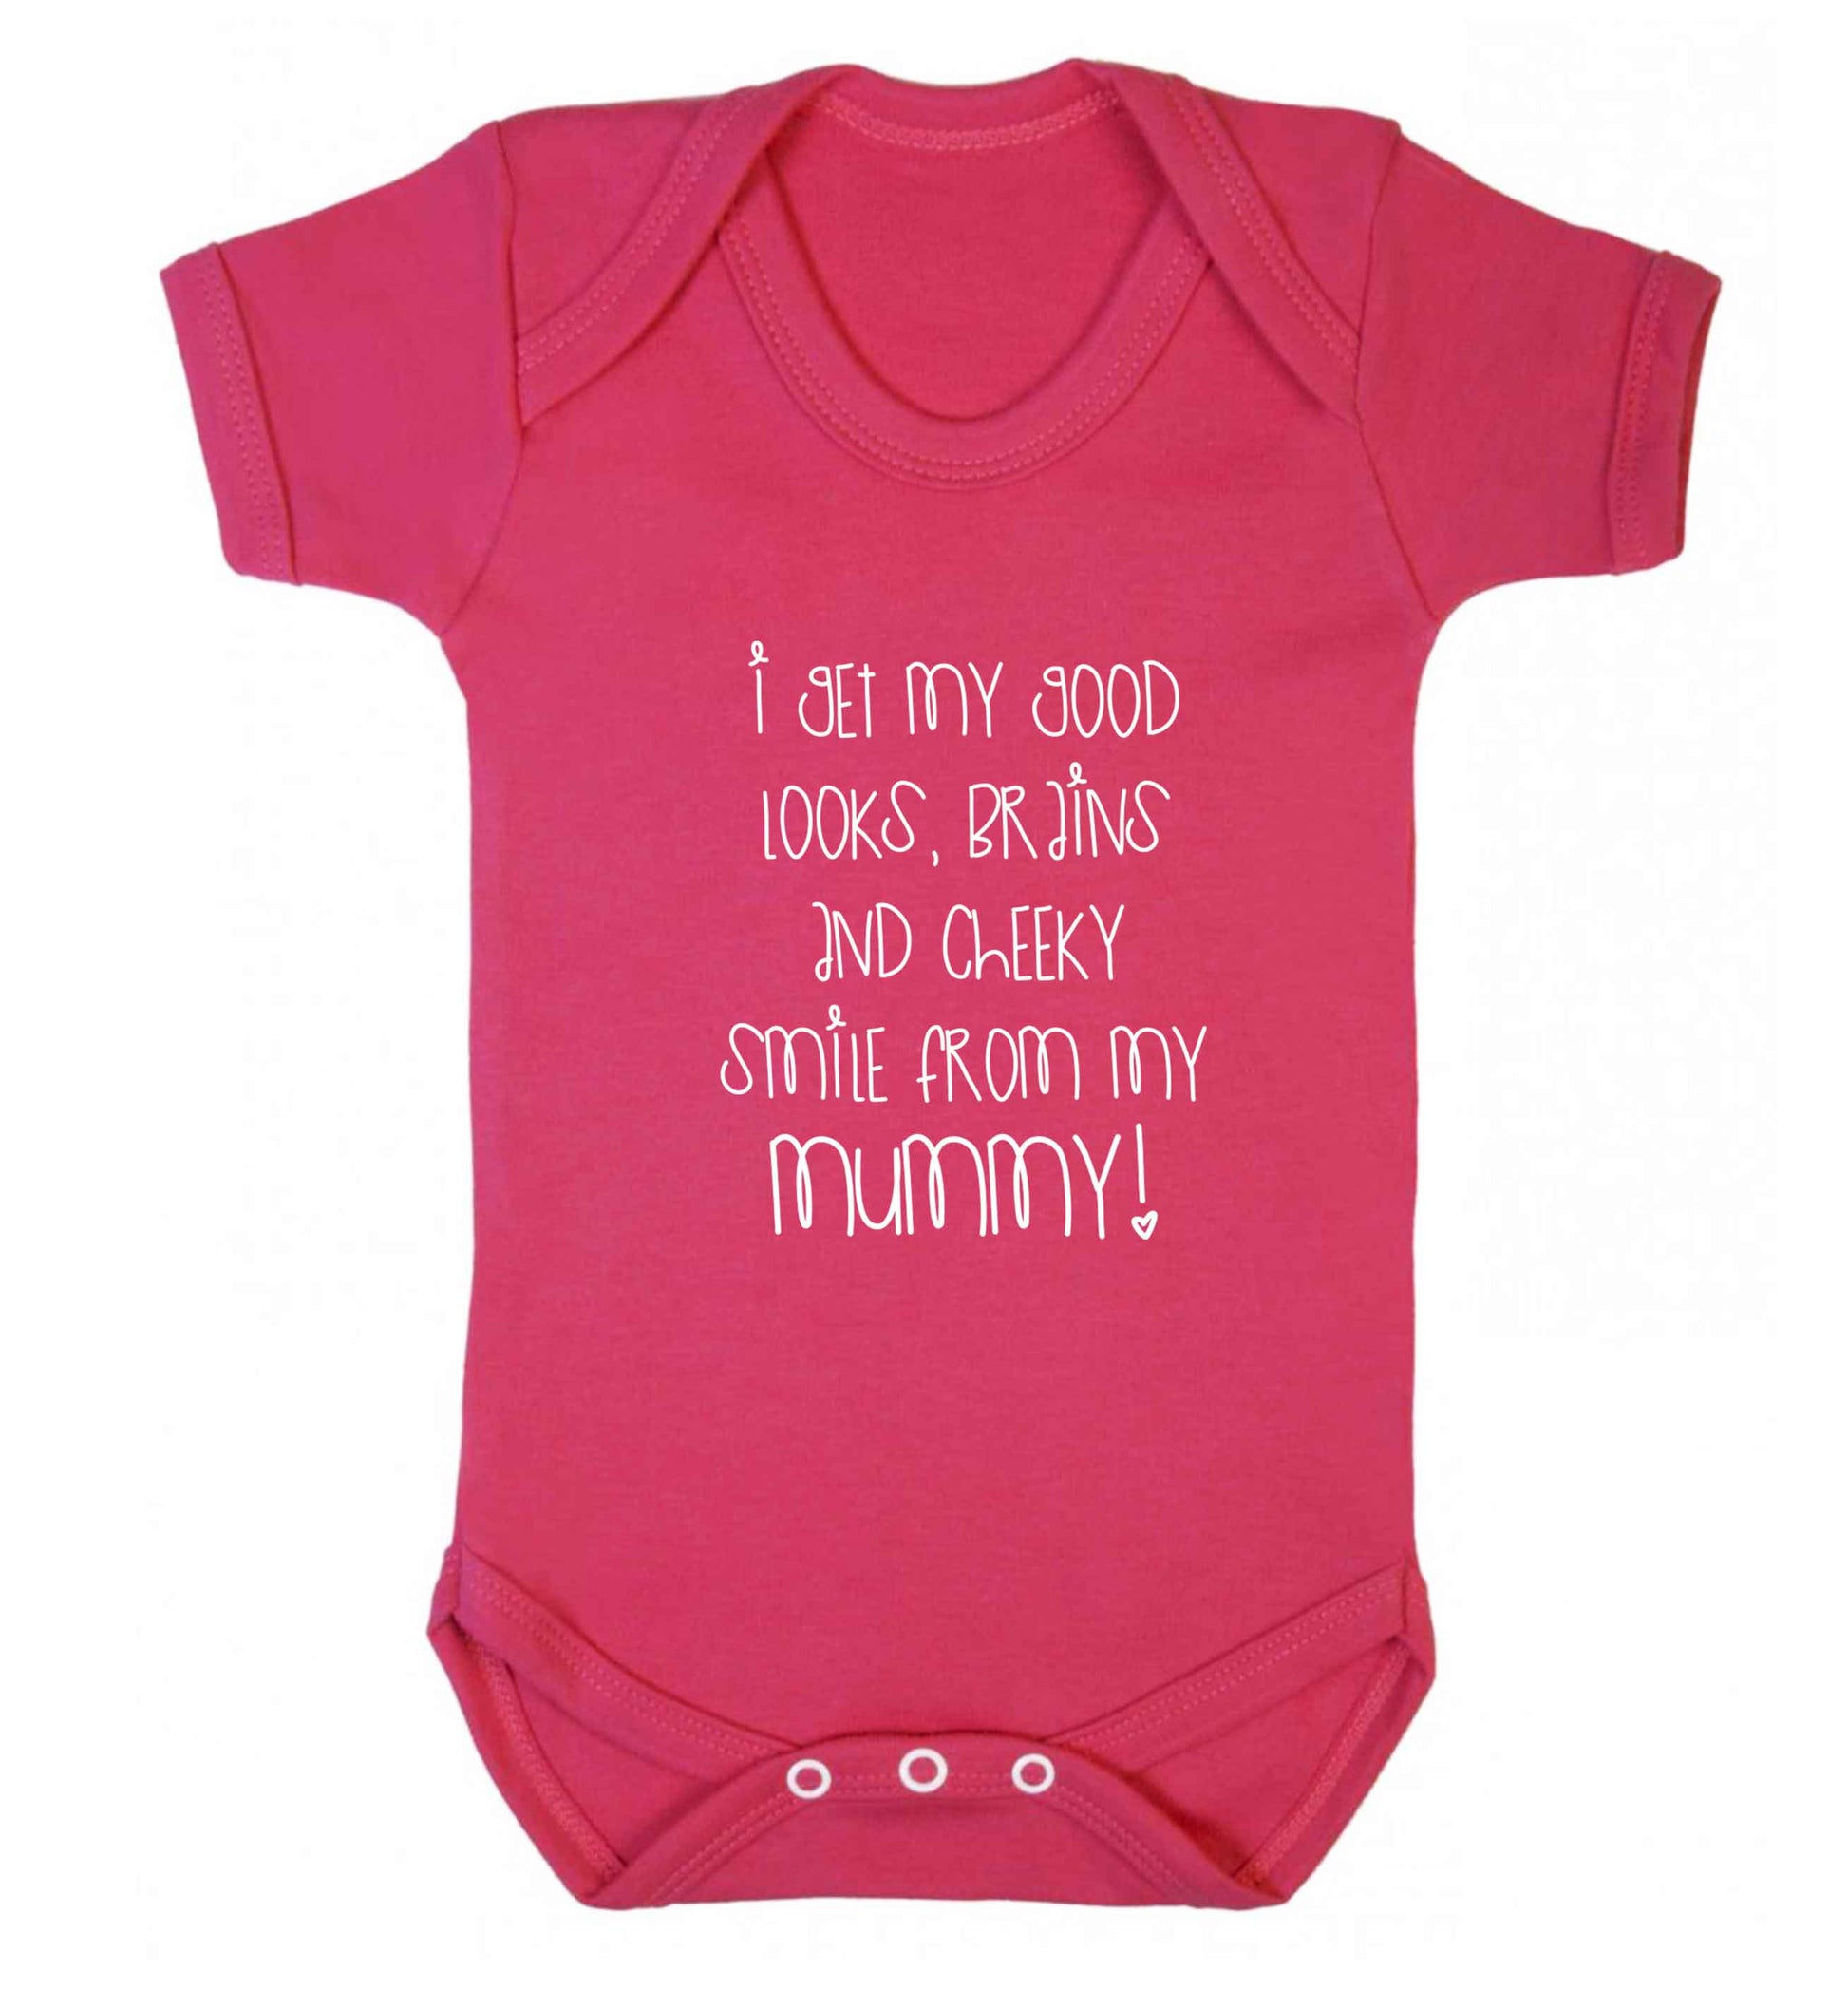 I get my good looks, brains and cheeky smile from my mummy baby vest dark pink 18-24 months